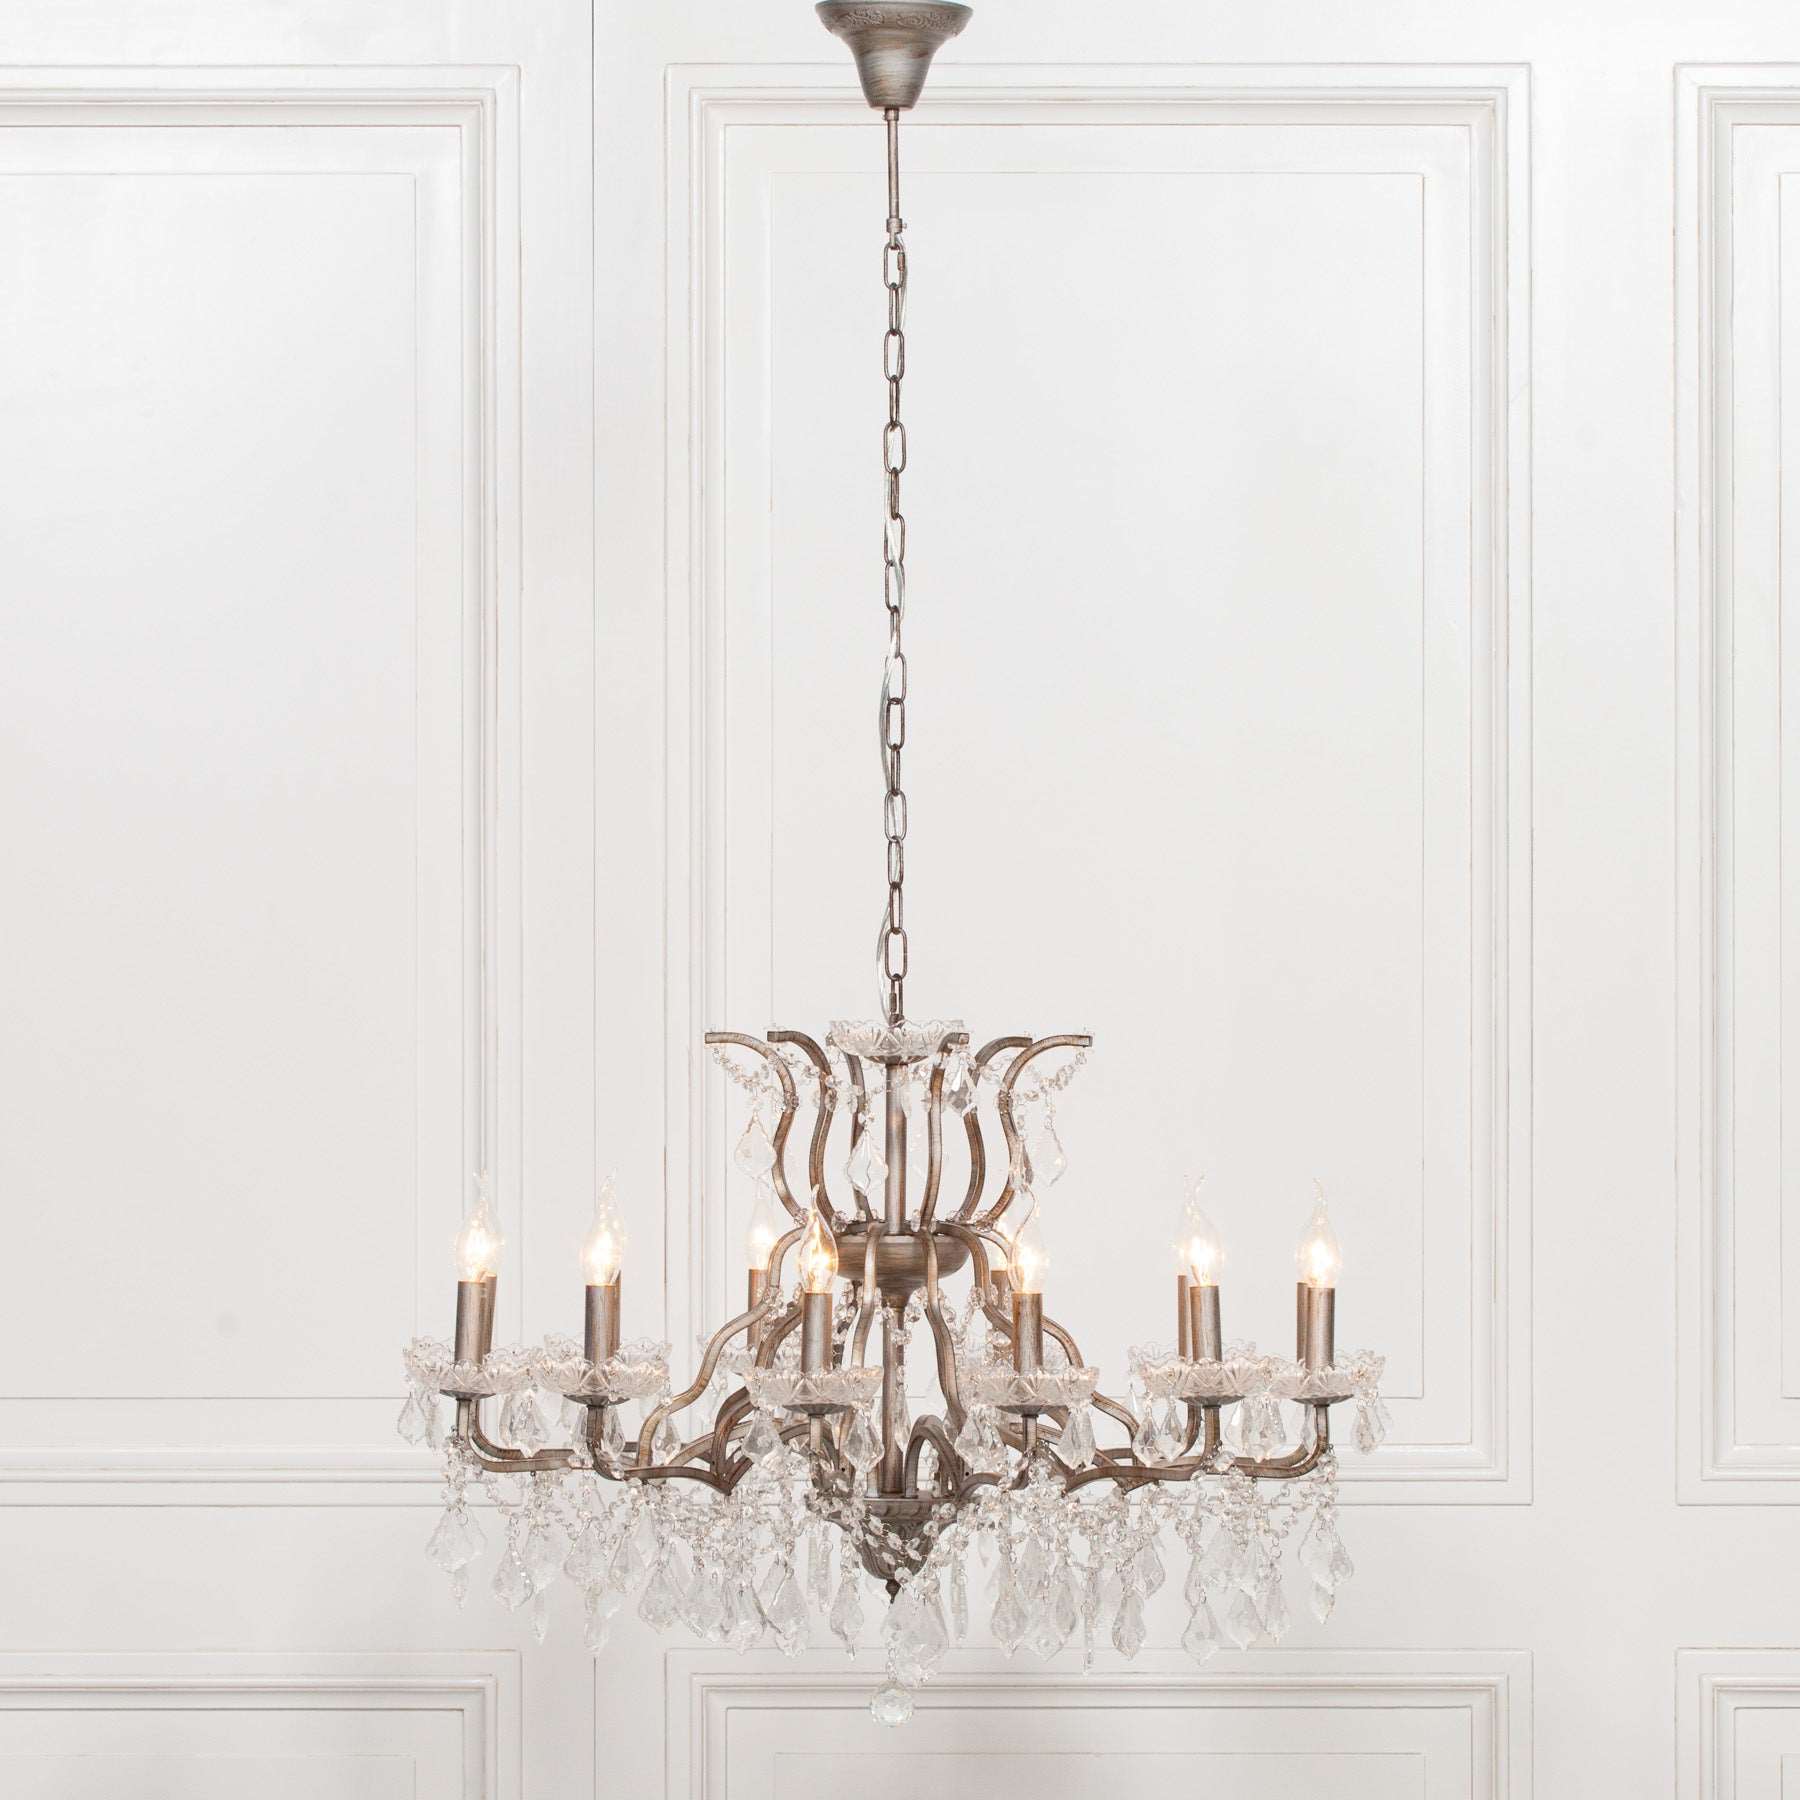 Antiqued Silver 12 Branch Shallow Cut Glass Chandelier